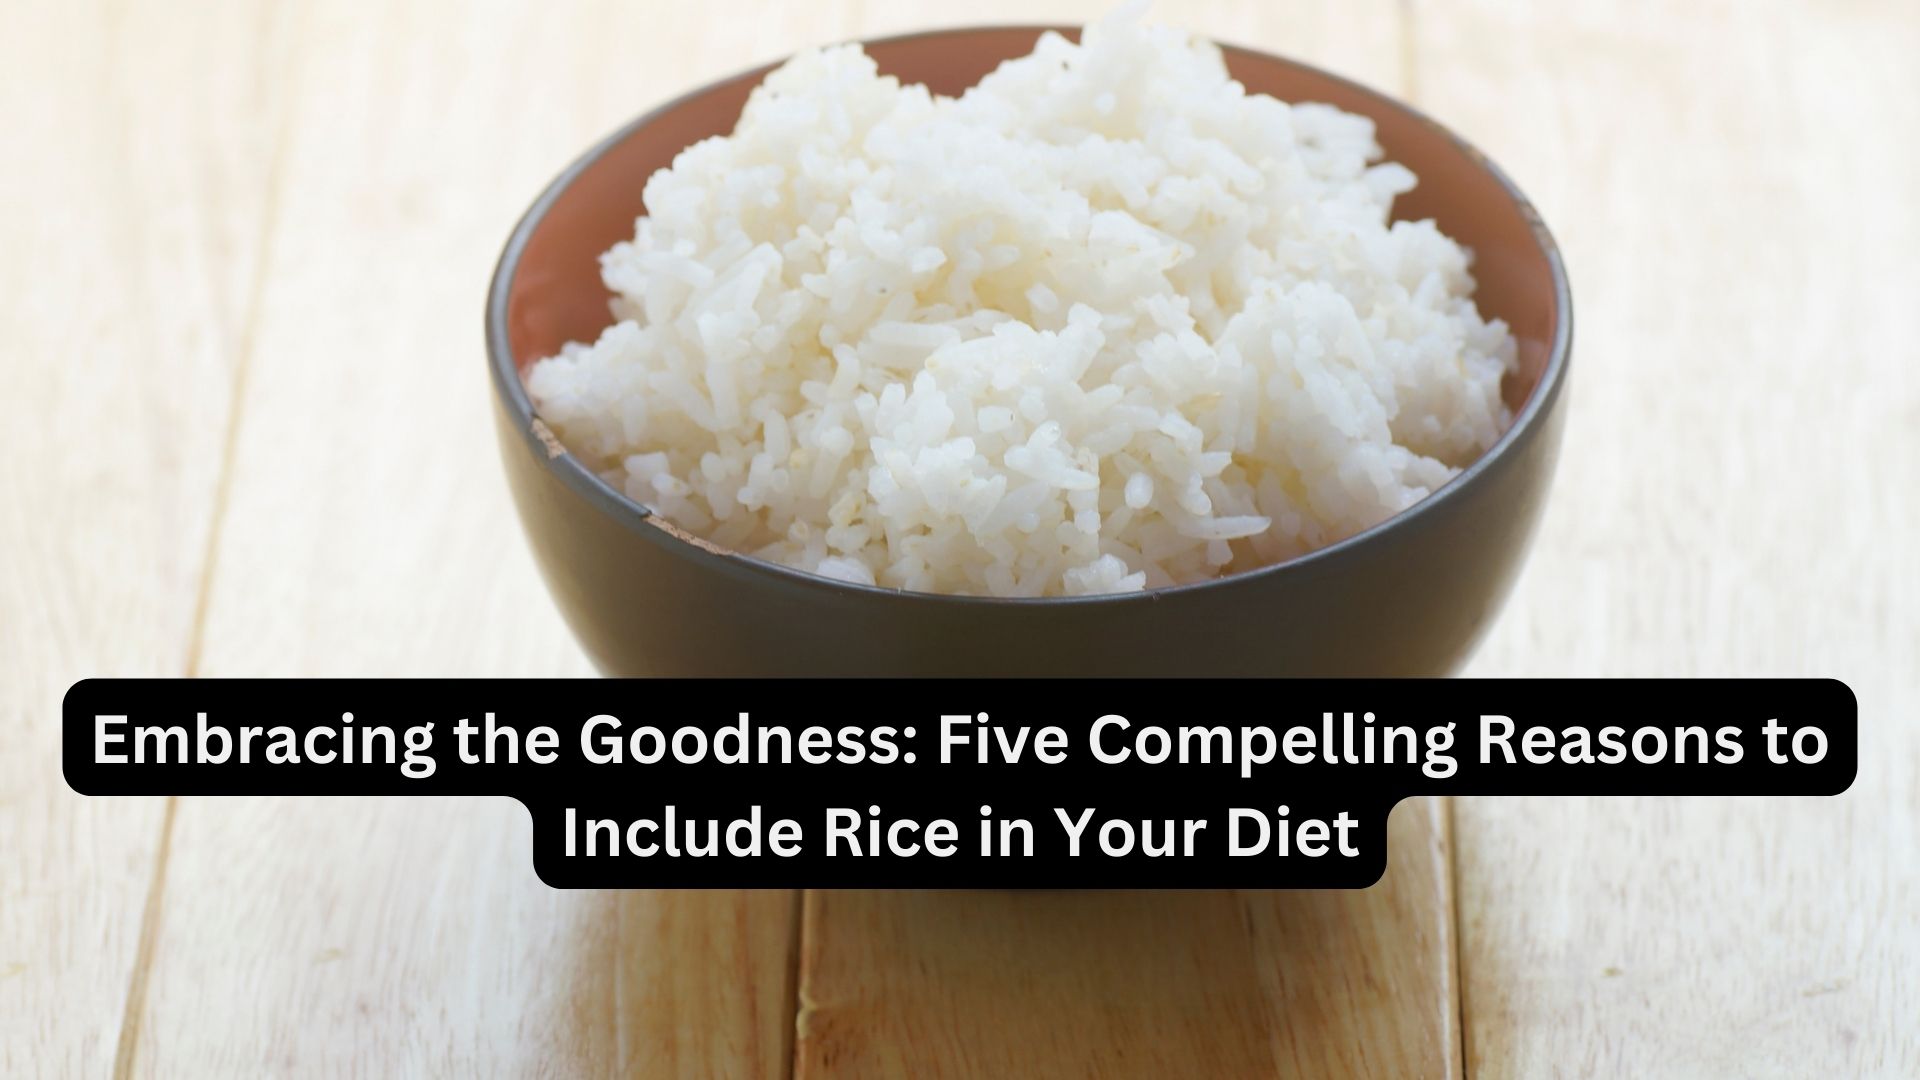 Embracing the Goodness: Five Compelling Reasons to Include Rice in Your Diet